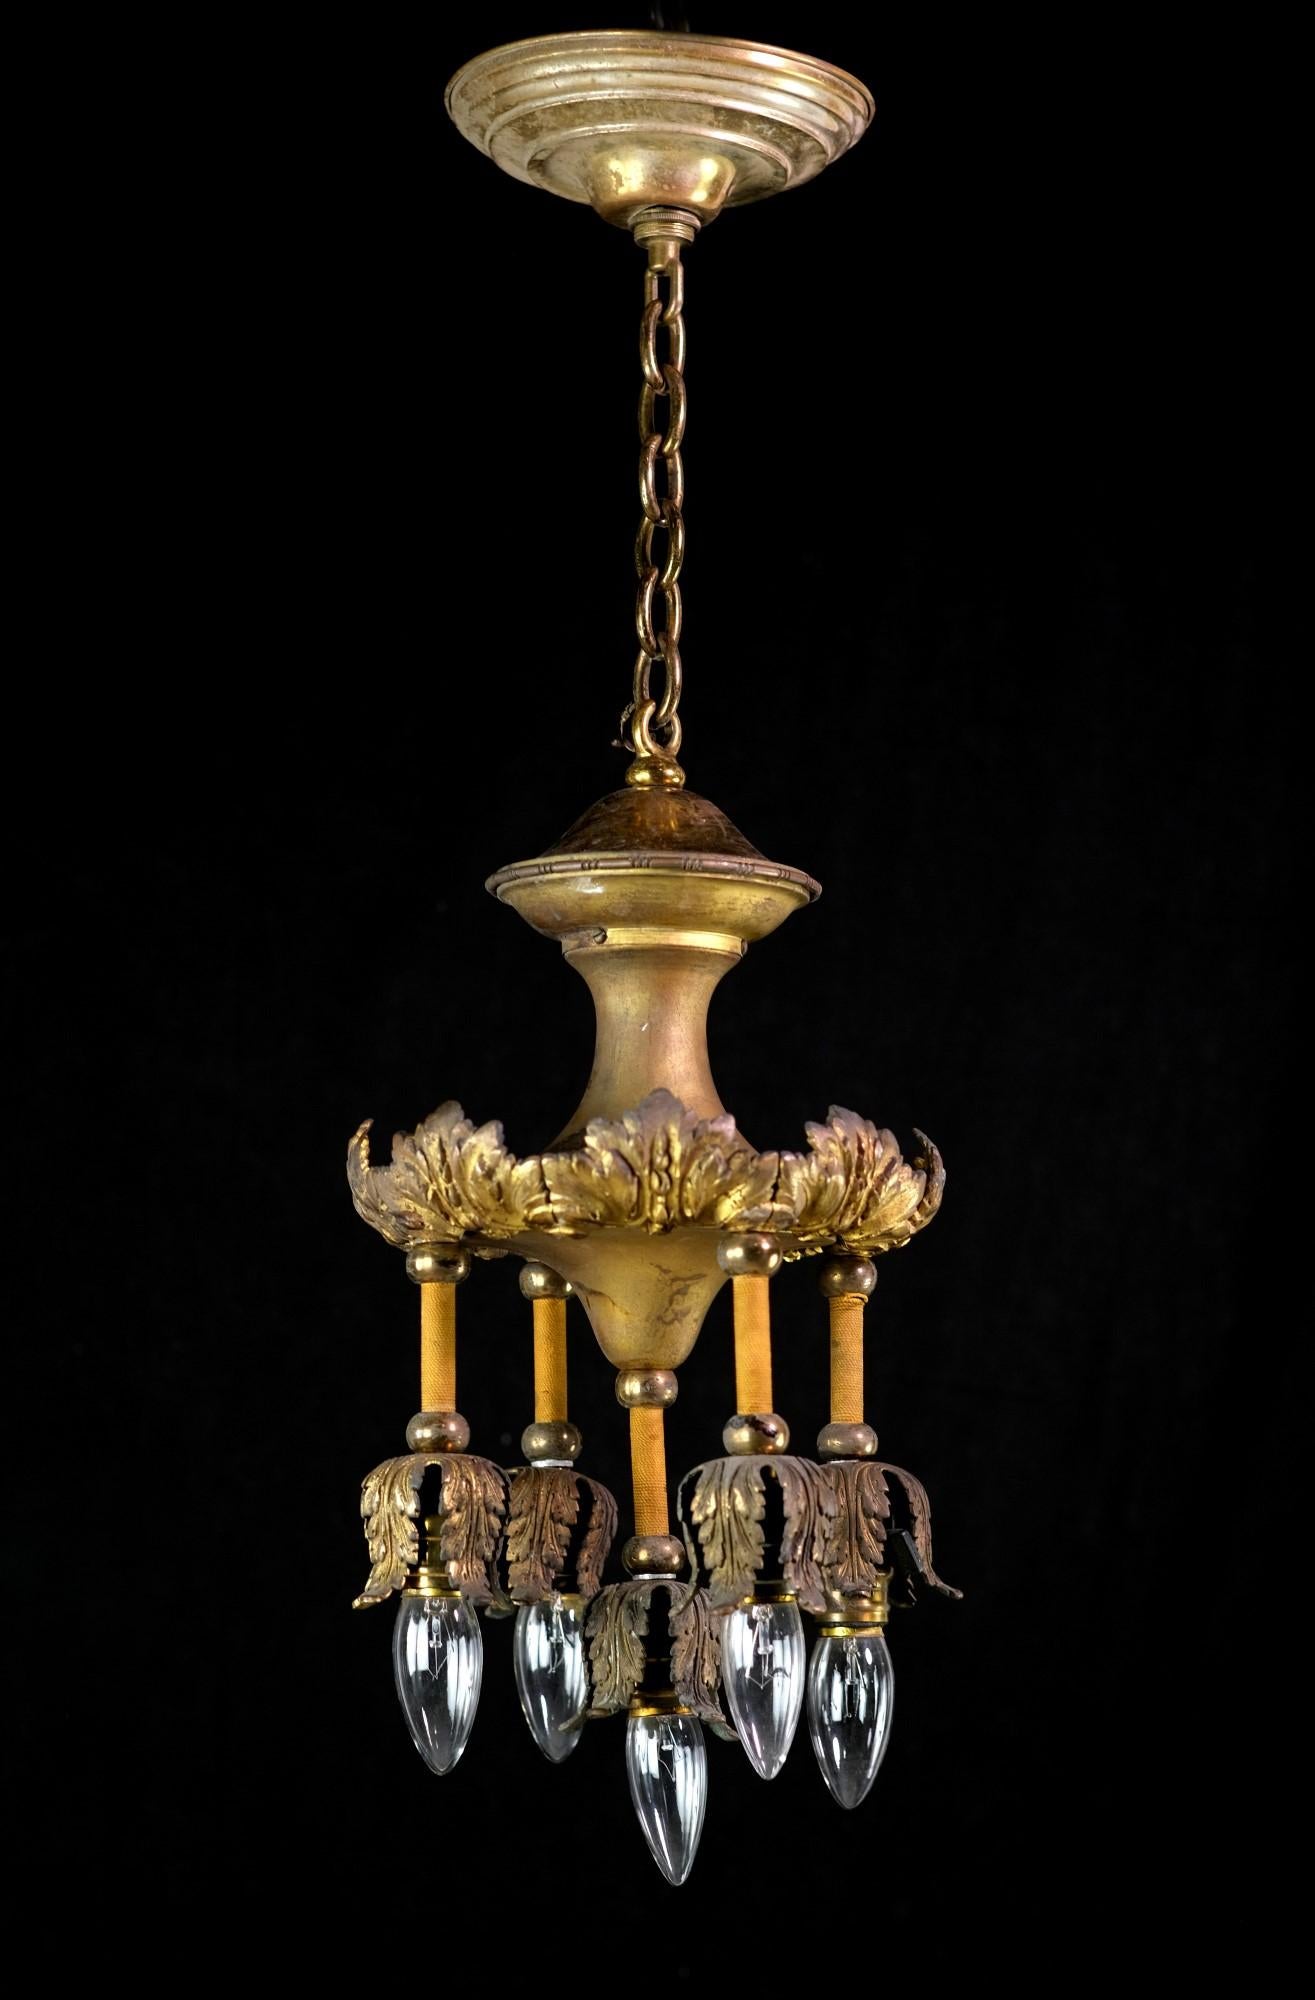 This antique cast bronze chandelier has elegant foliage details enhancing the top and bottom of each down light. There is a natural patina, and it is gold gilt which shows some wear. The arm of each light is wrapped in amber twine, which is original